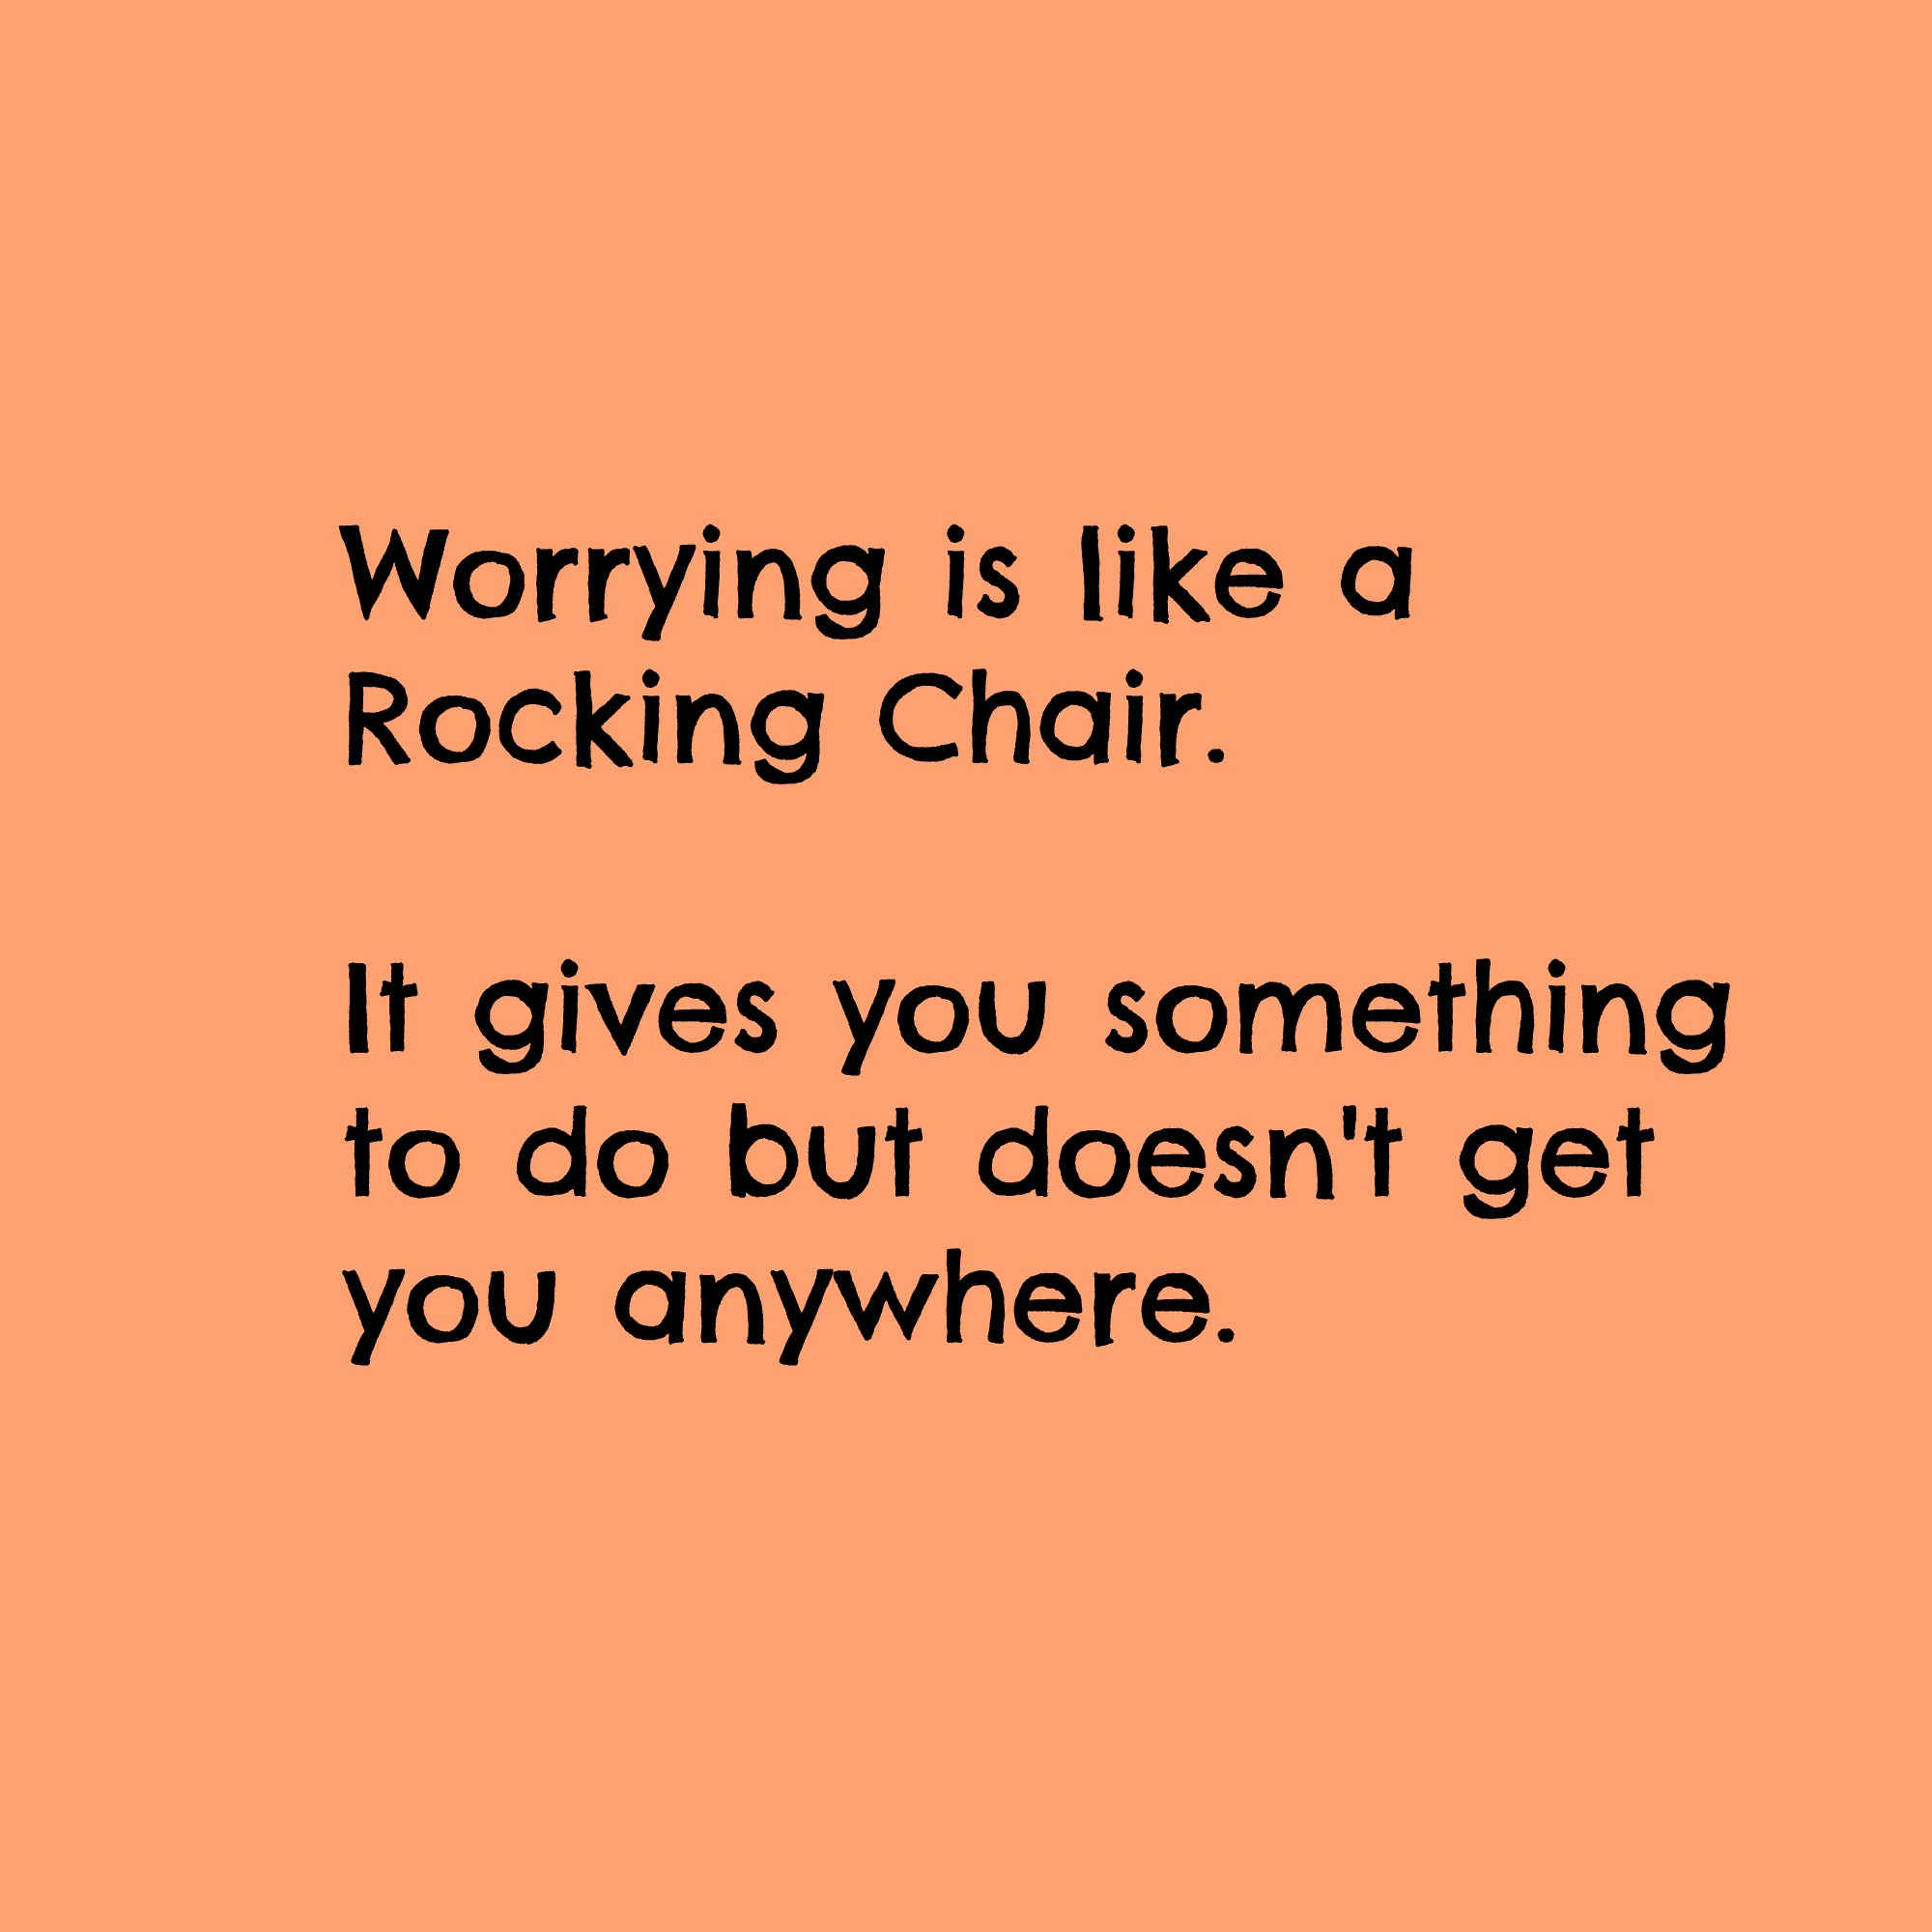 Ways to Stop Worrying - Where Does Worry Get You?